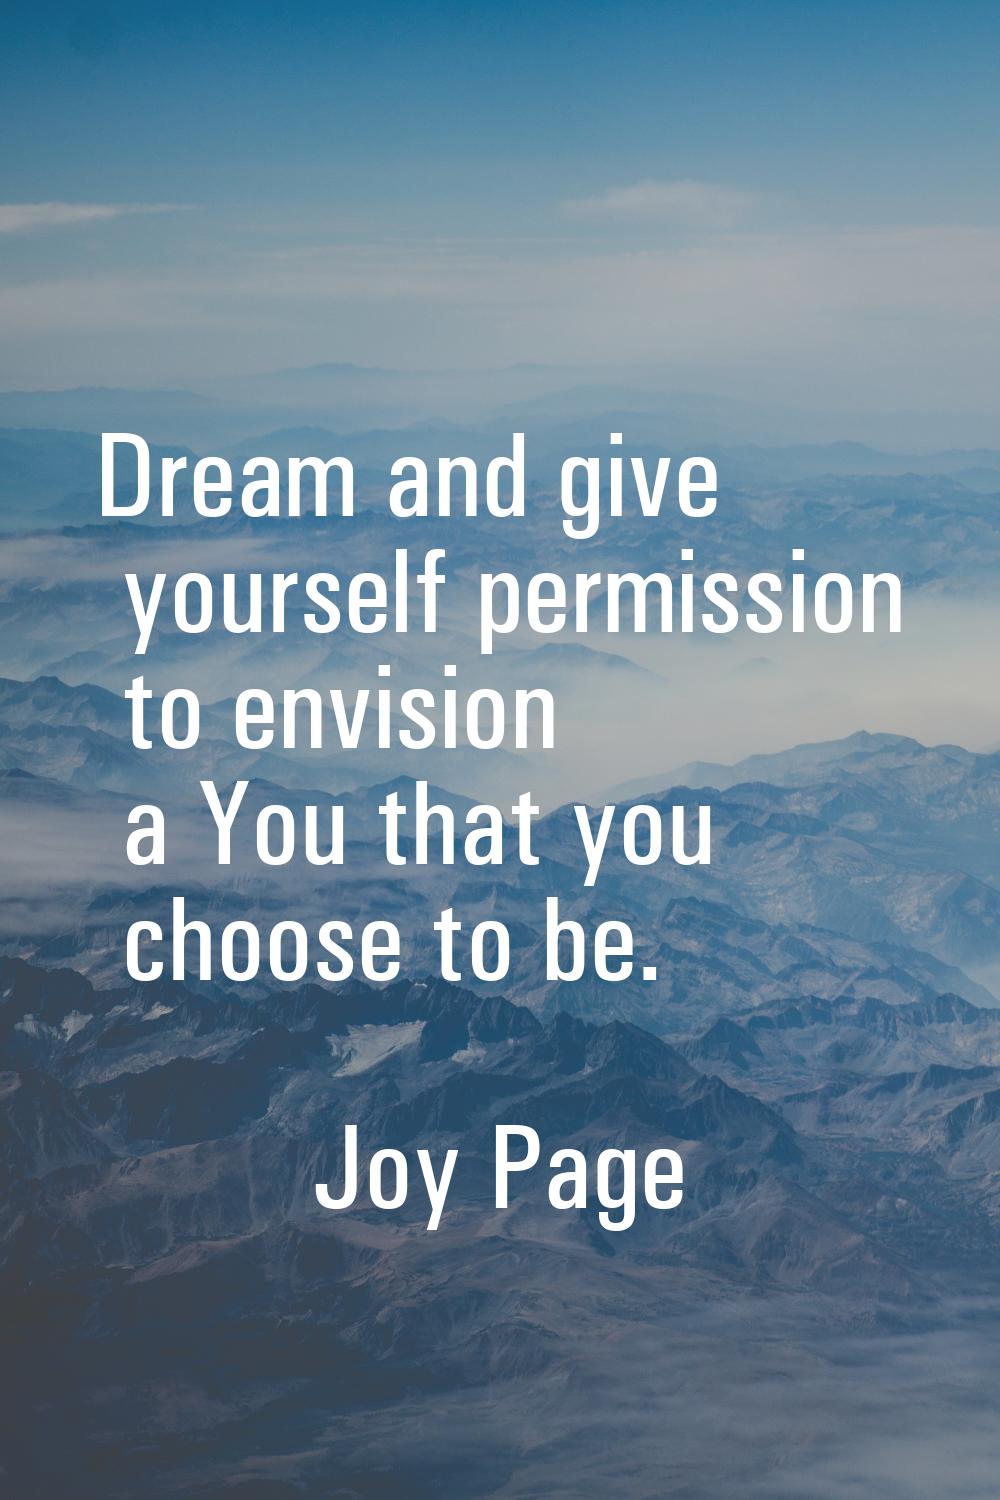 Dream and give yourself permission to envision a You that you choose to be.